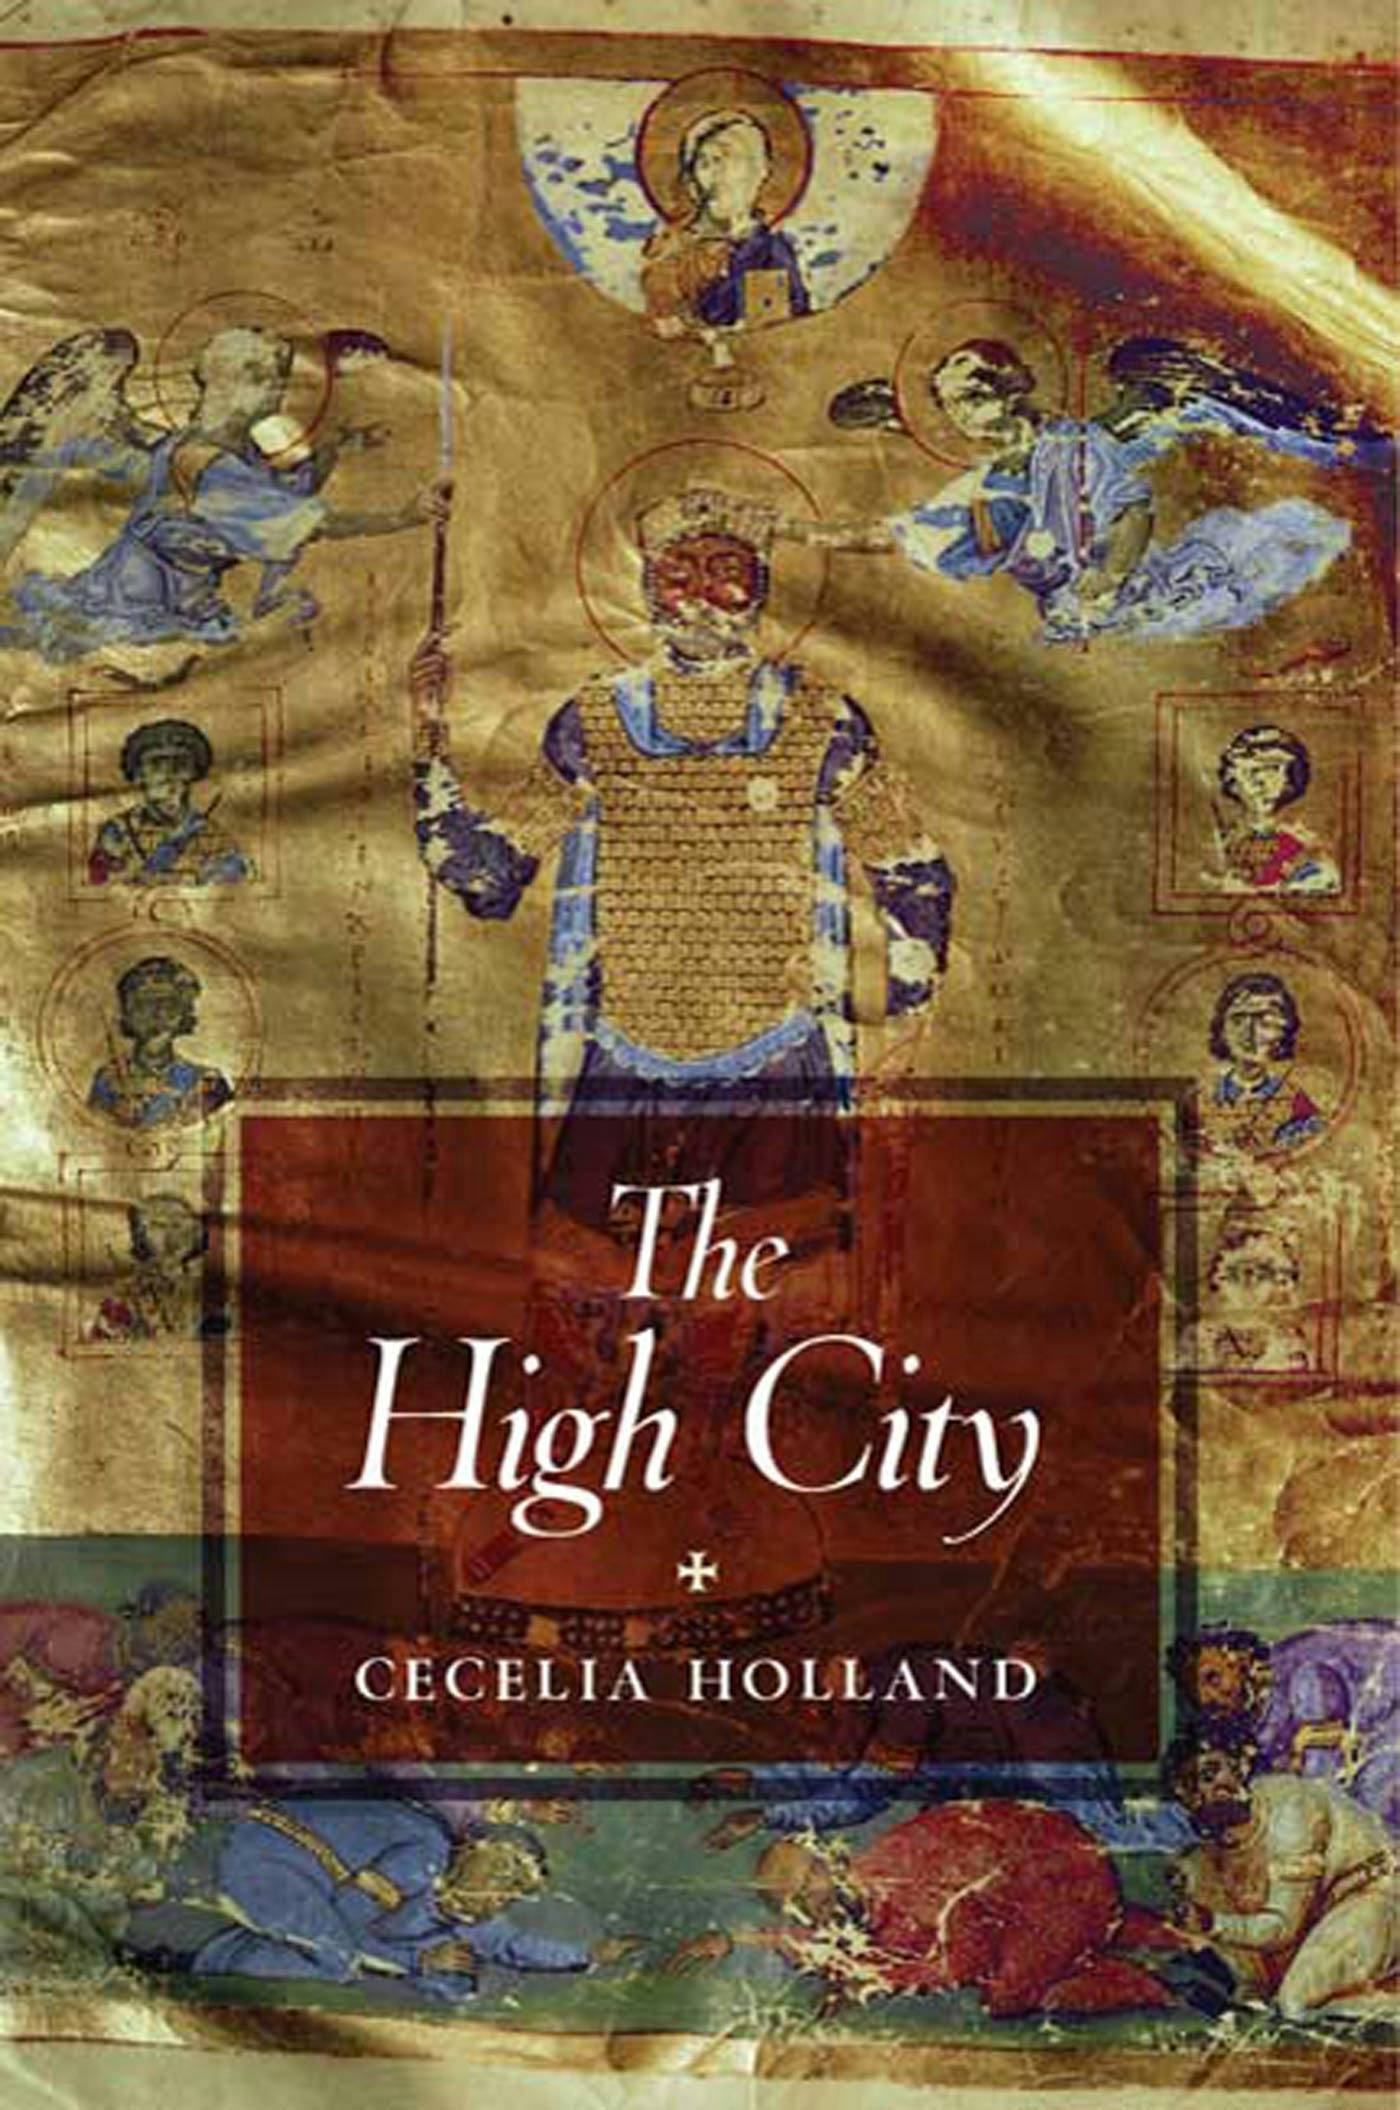 Cover for the book titled as: The High City